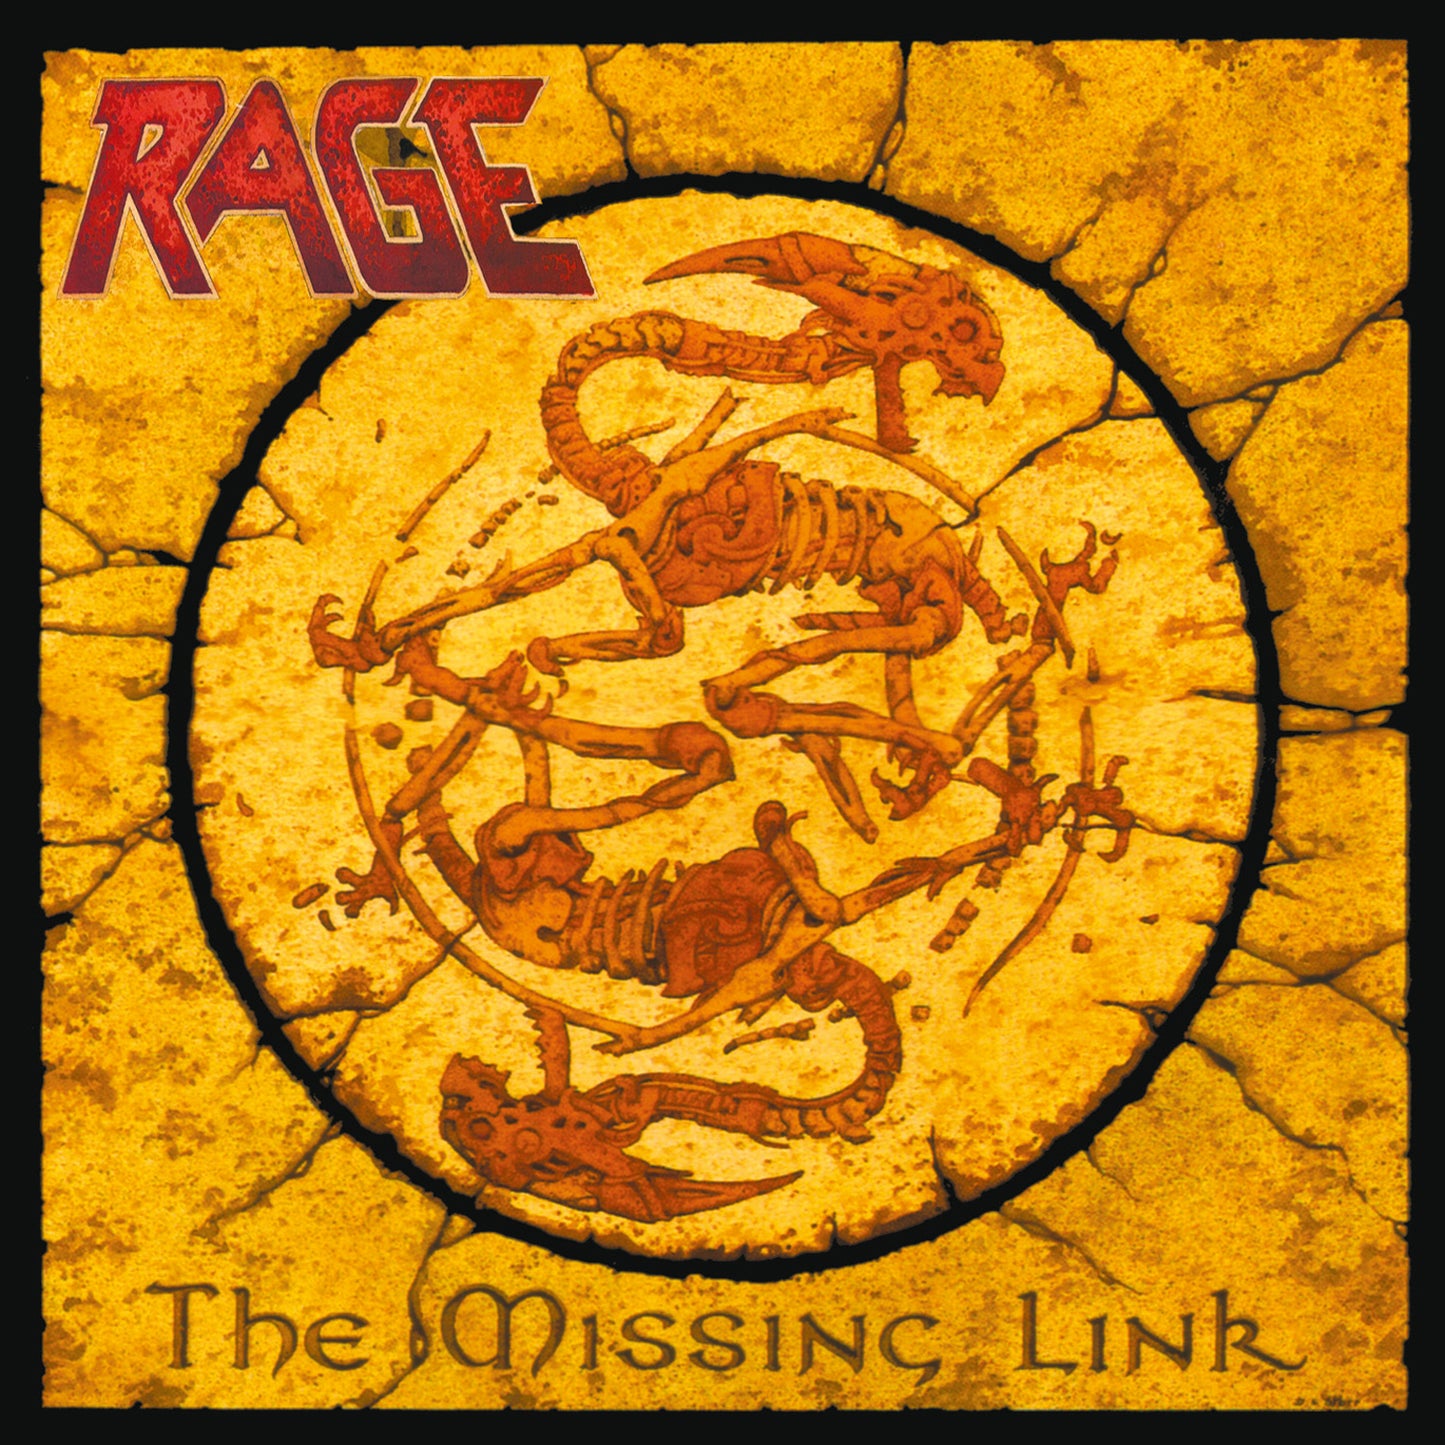 CD "The Missing Link"